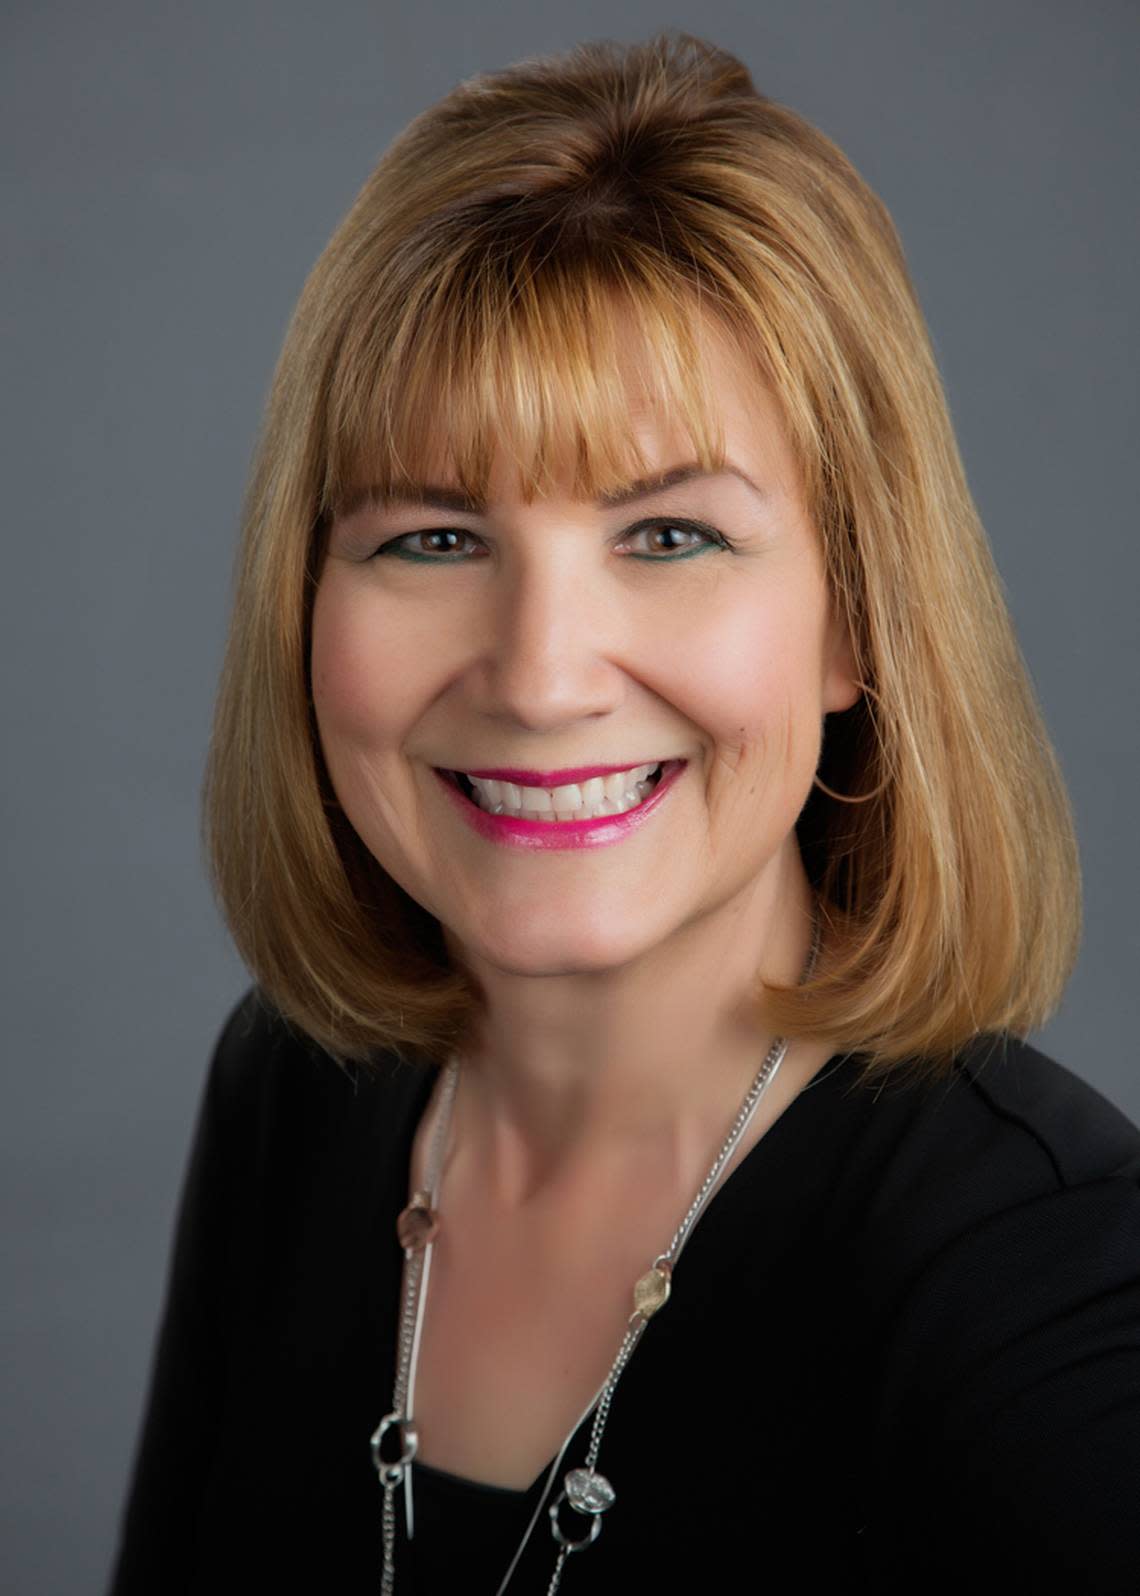 Cyndi Elliot, real estate agent with Group One Sotheby’s International Realty since 2000 and member of the Boise Regional Realtors Board of Directors.